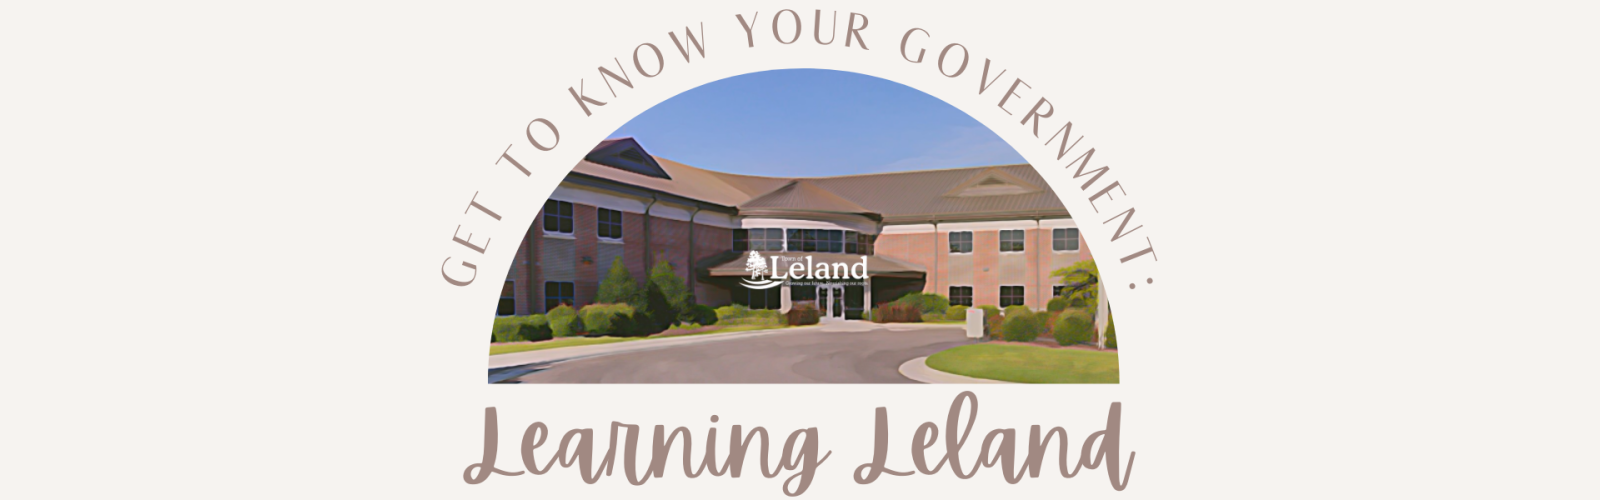 Get to Know Your Government: Learning Leland